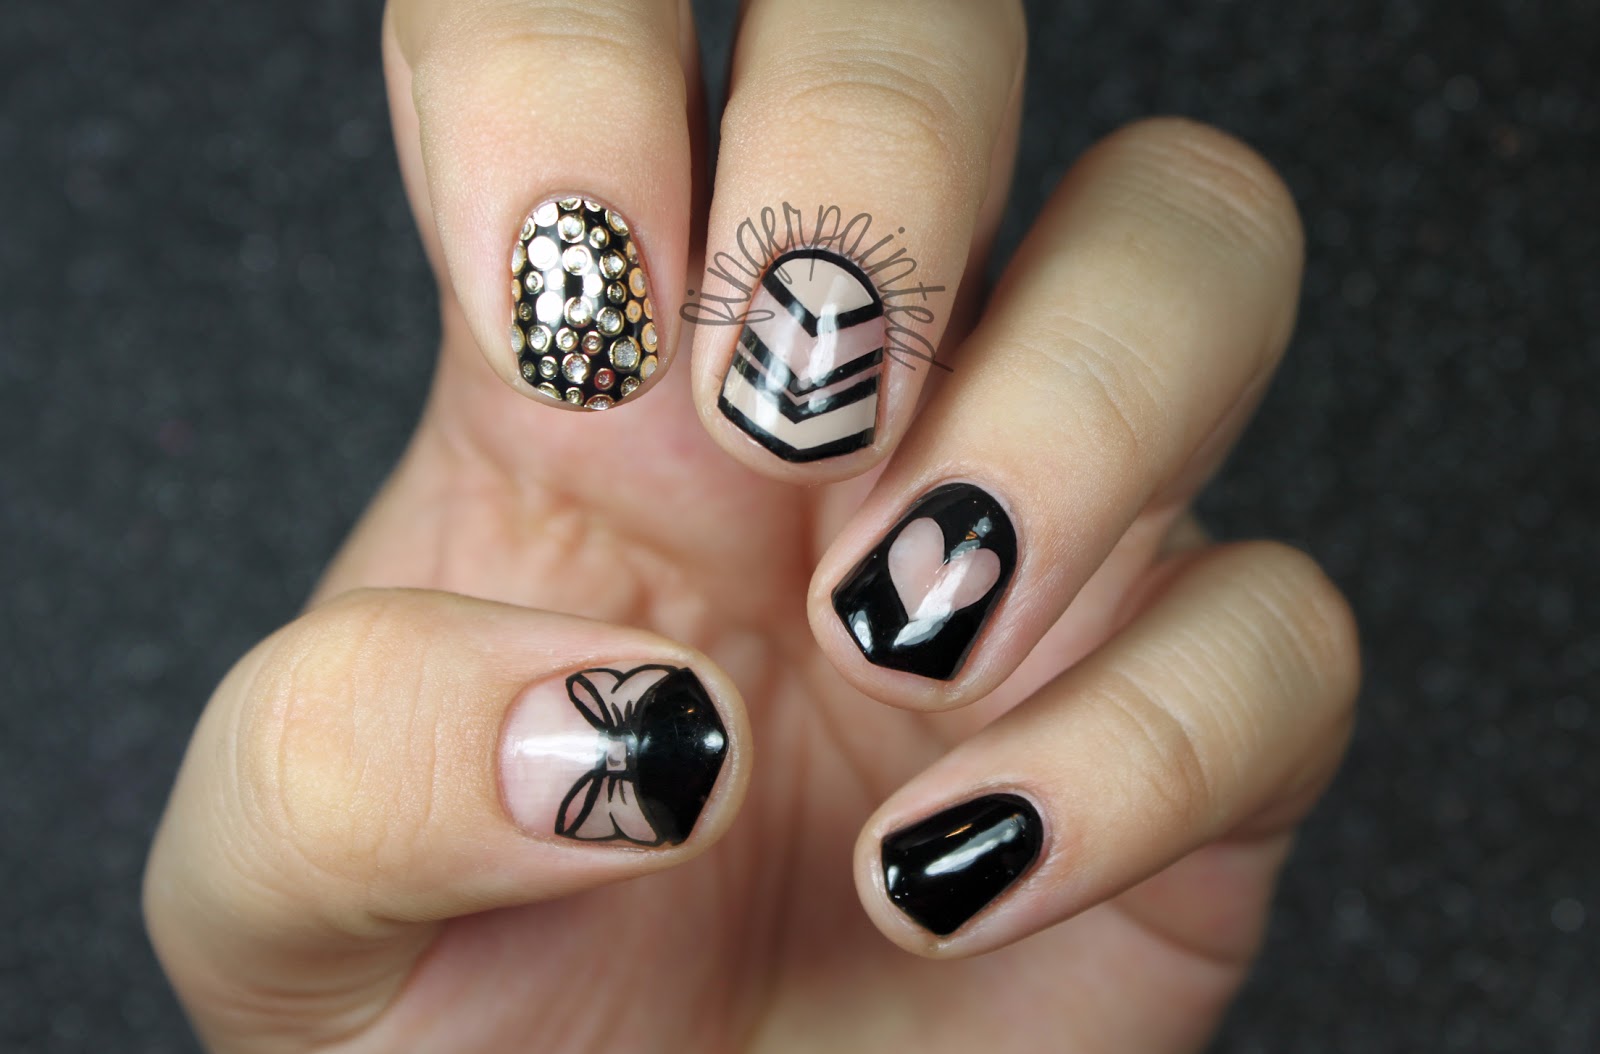 Black Nails with Design